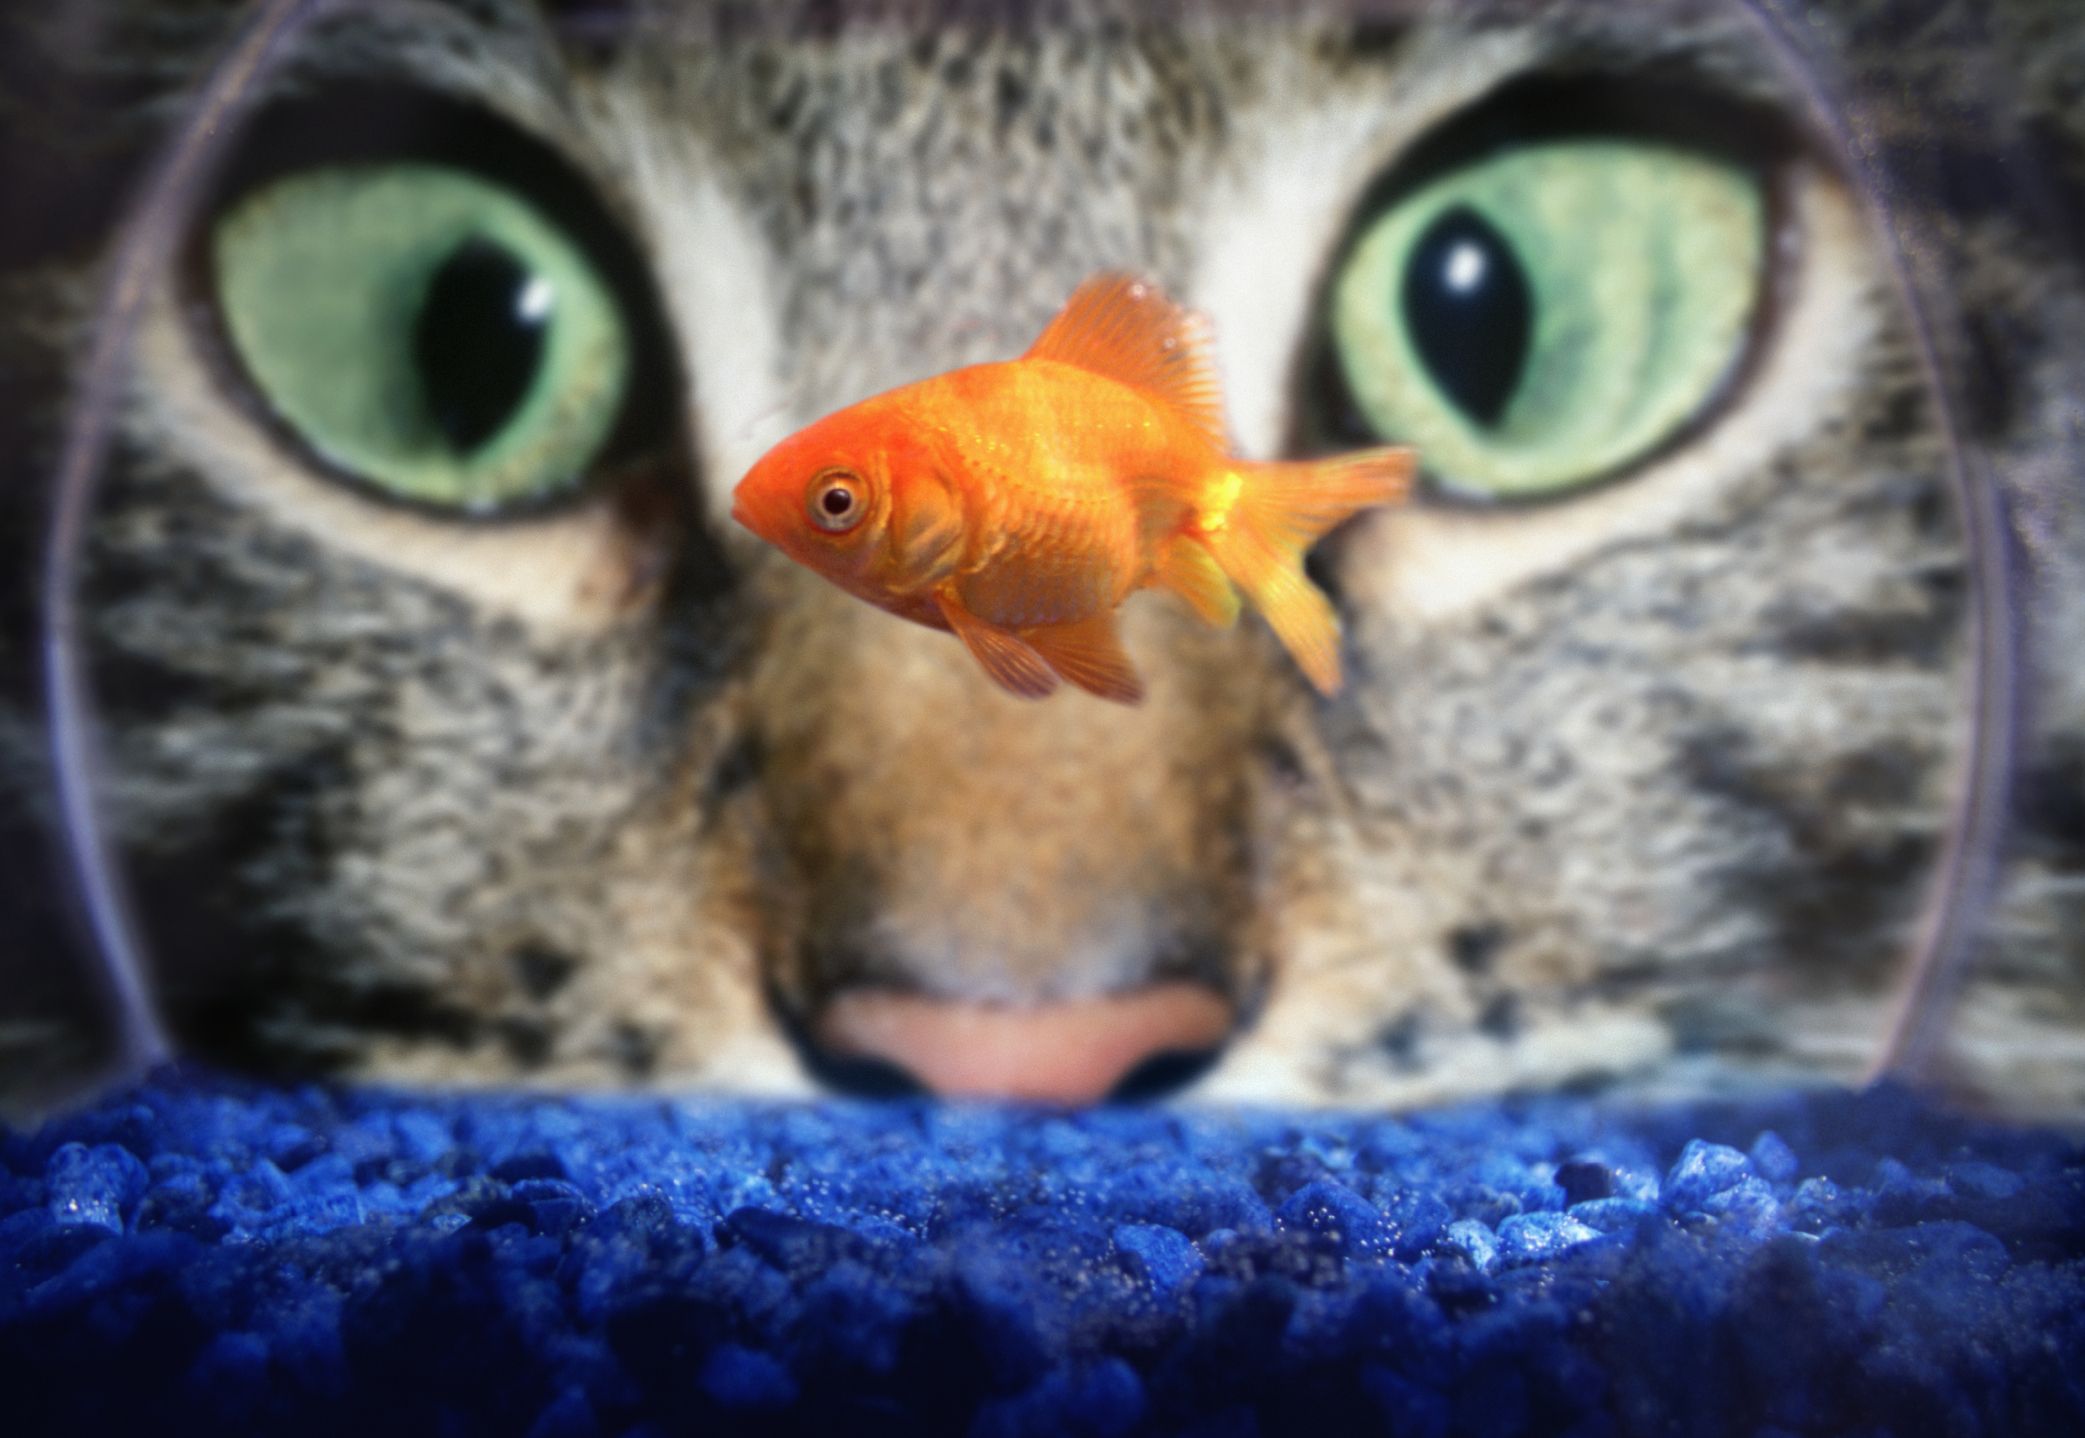 200+ Great Name Ideas for Your Pet Fish